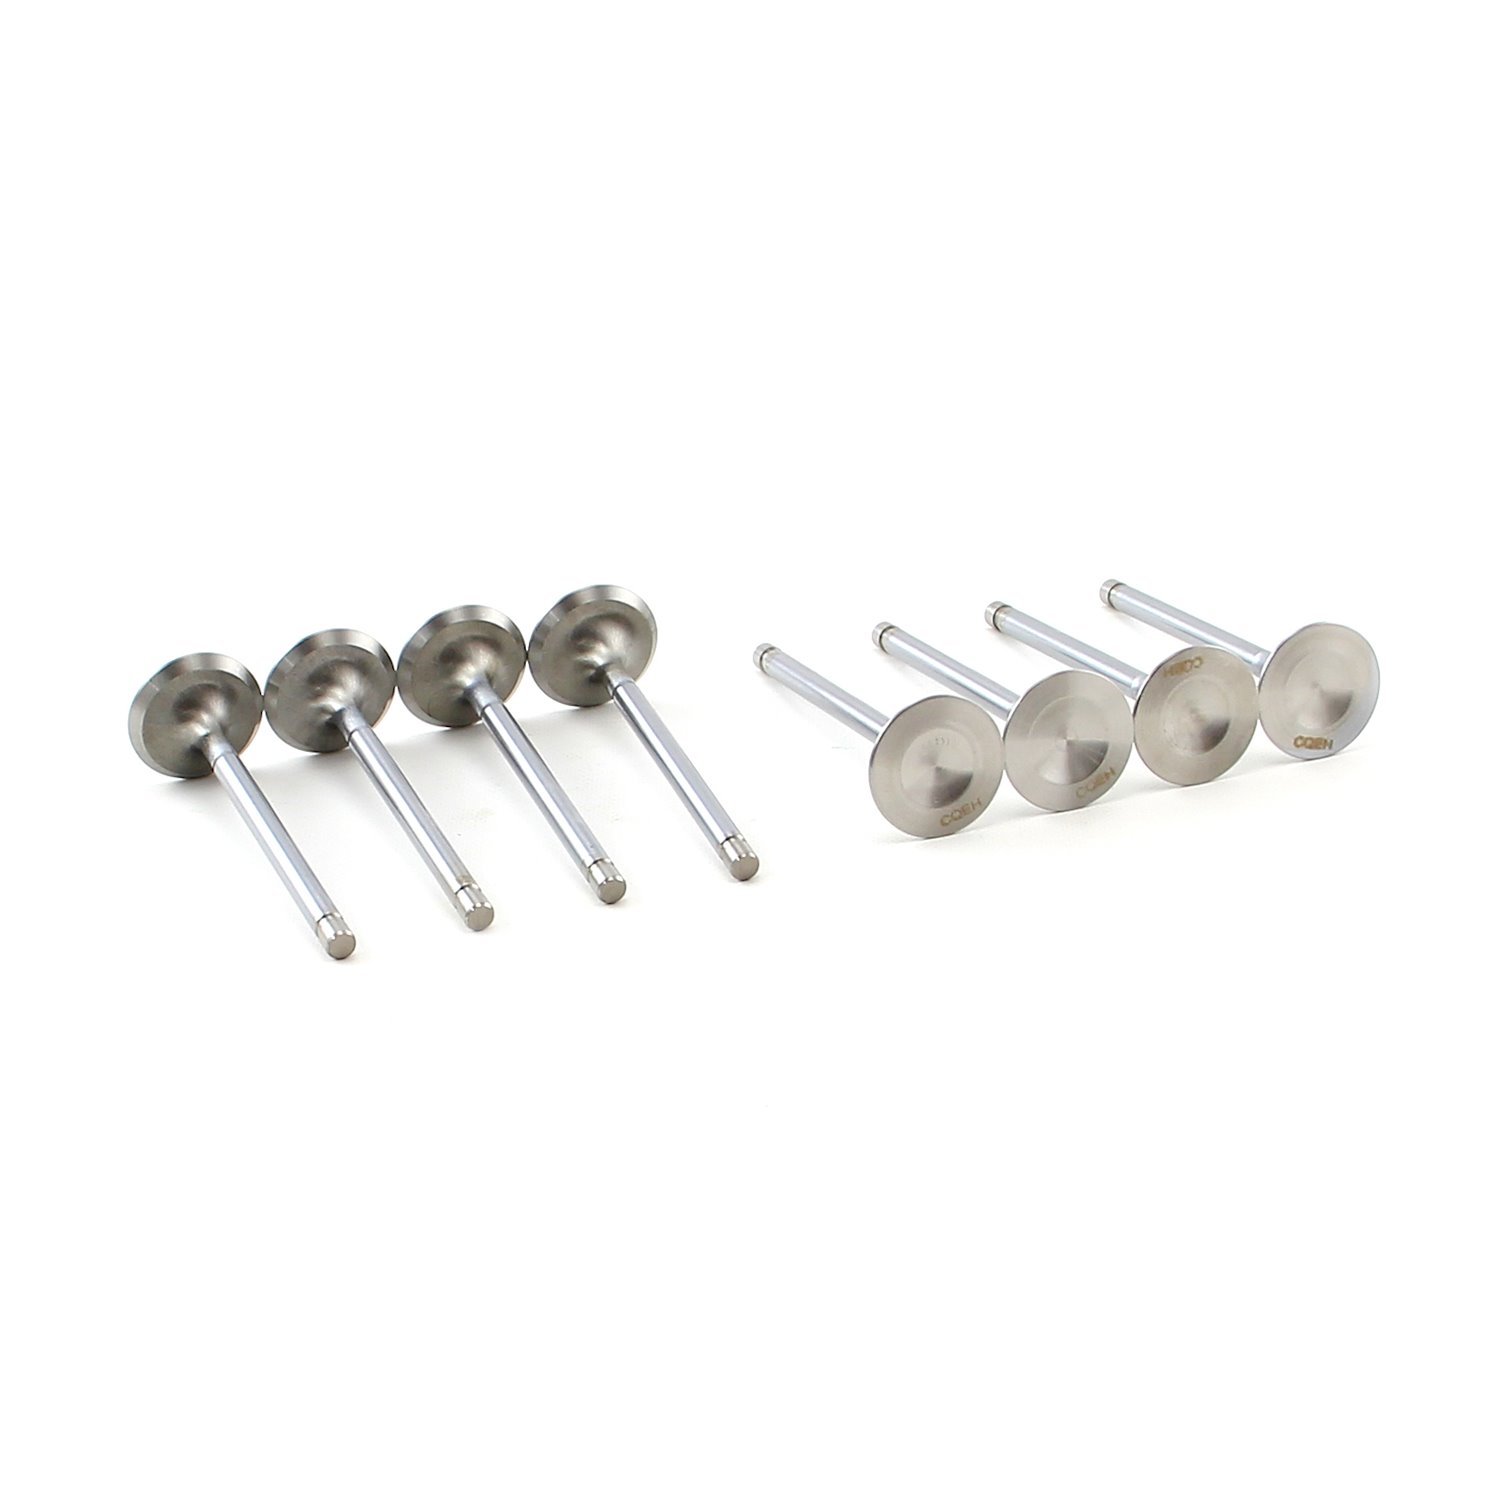 Chevy BBC 454 1.880 +100 11/32 Stainless Steel Exhaust Valves Set 8Pcs